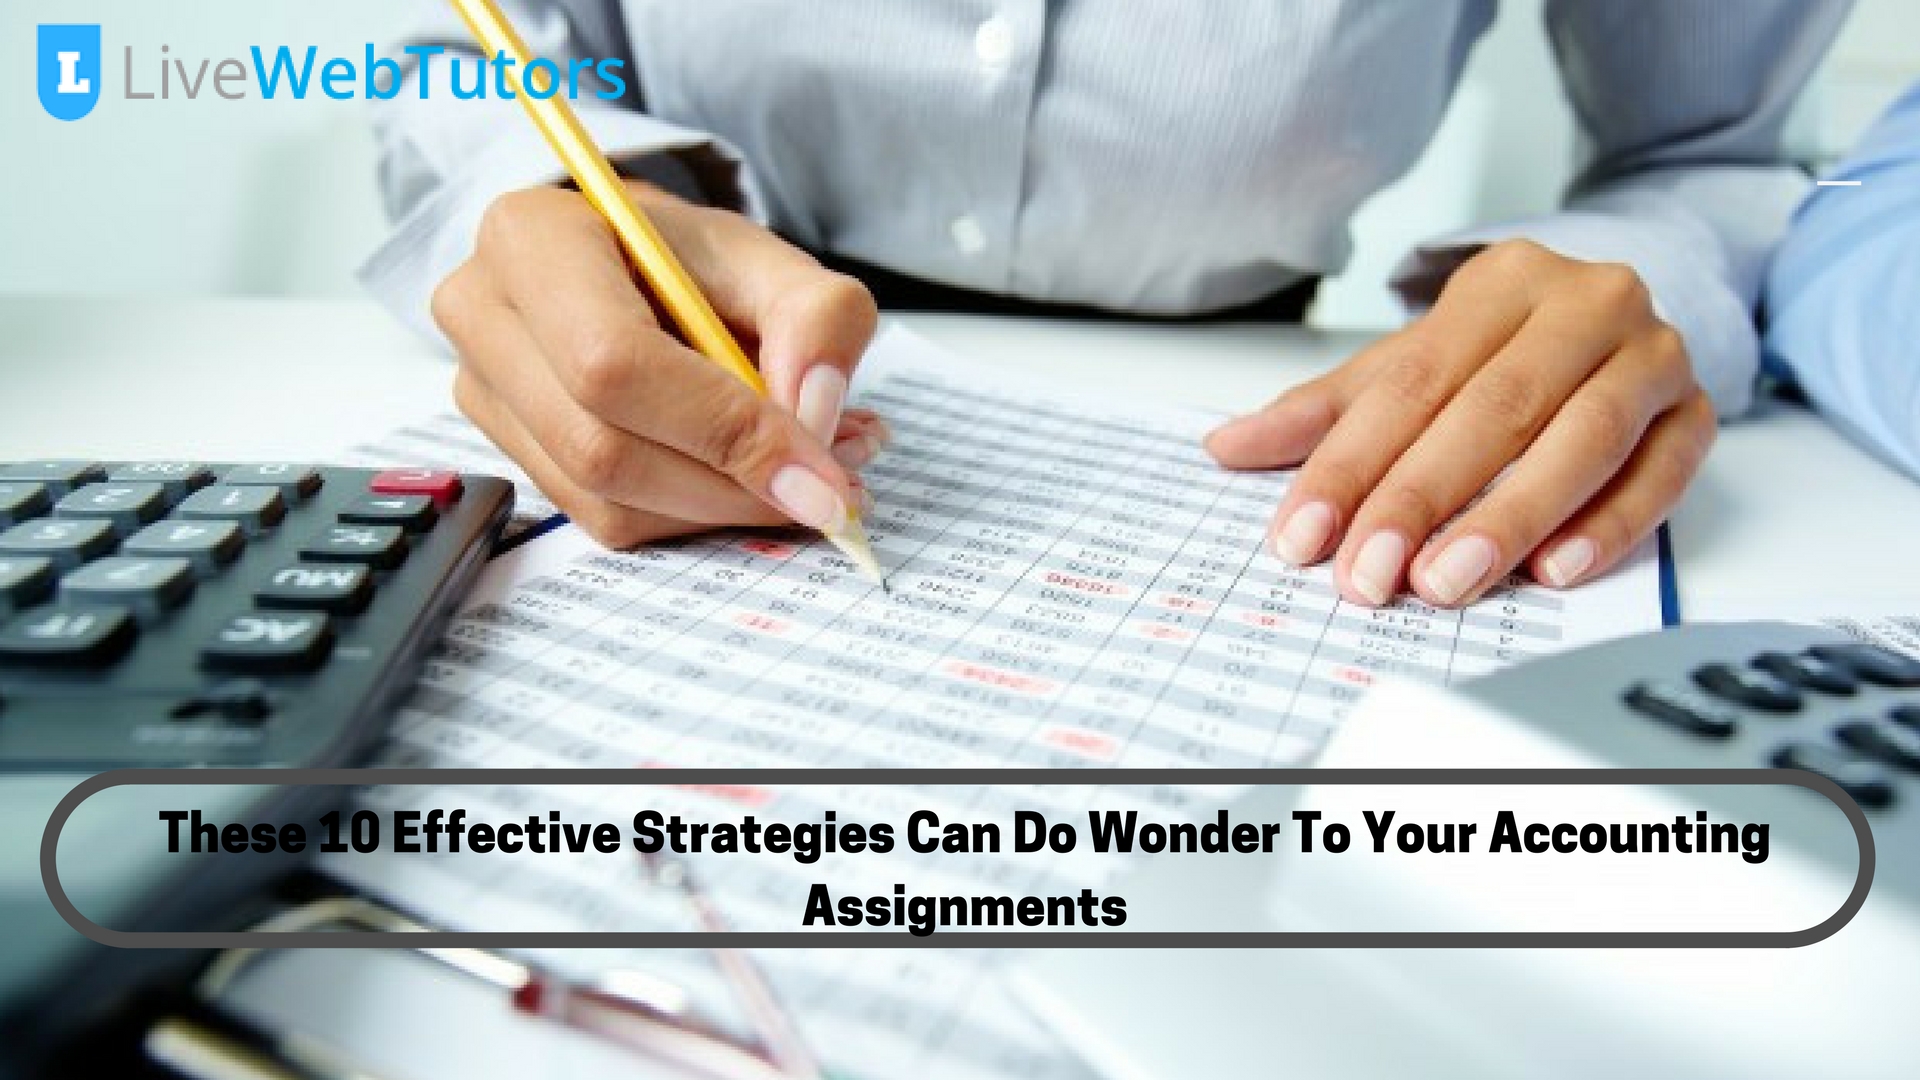 10 Effective Strategies Can Do Wonder To Your Accounting Assignments